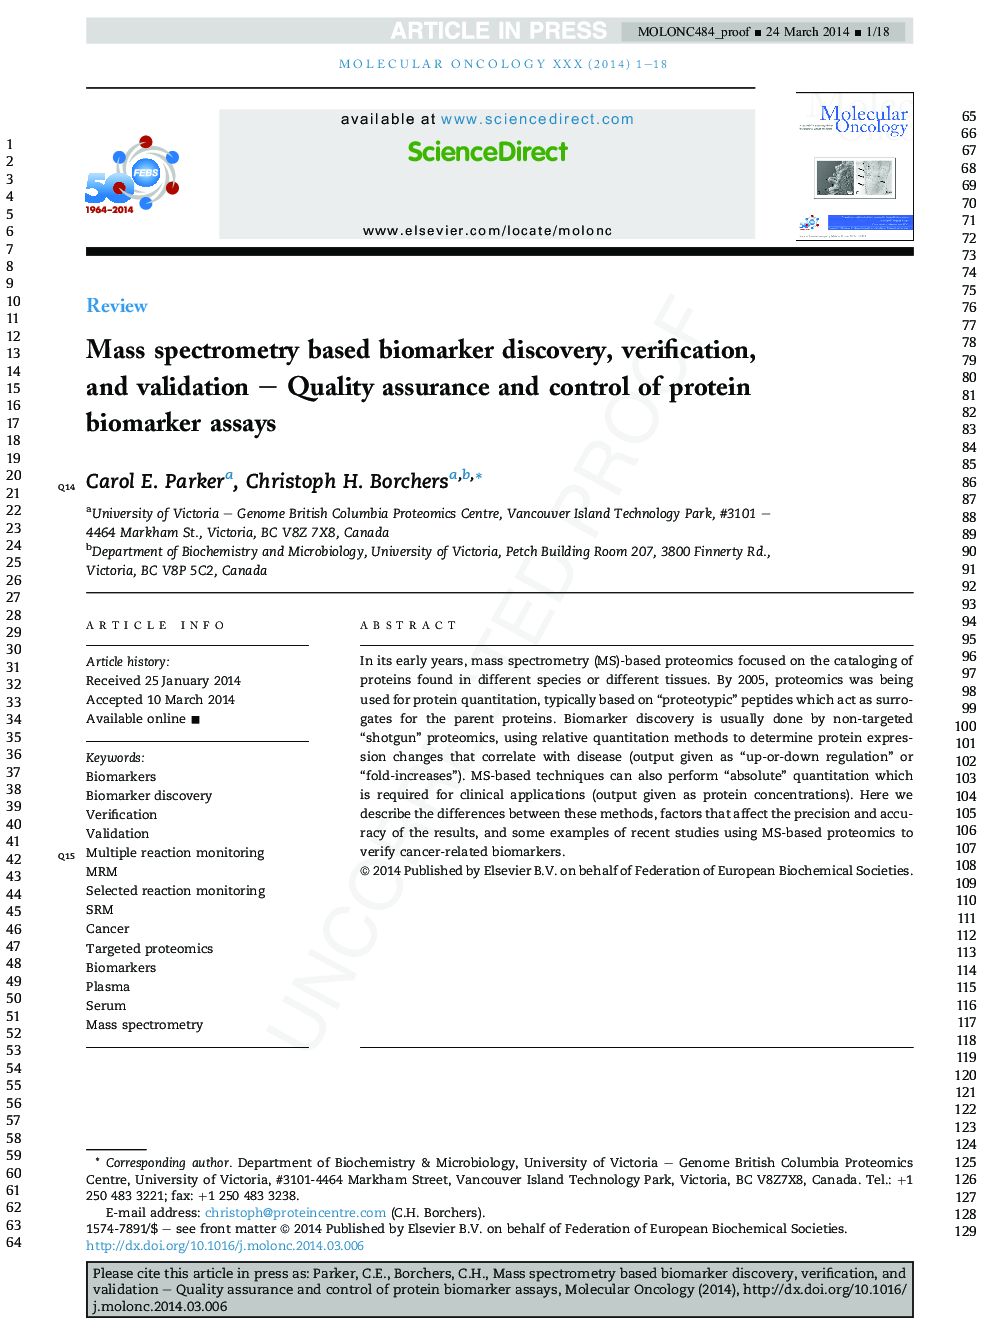 Mass spectrometry based biomarker discovery, verification, and validation - Quality assurance and control of protein biomarker assays